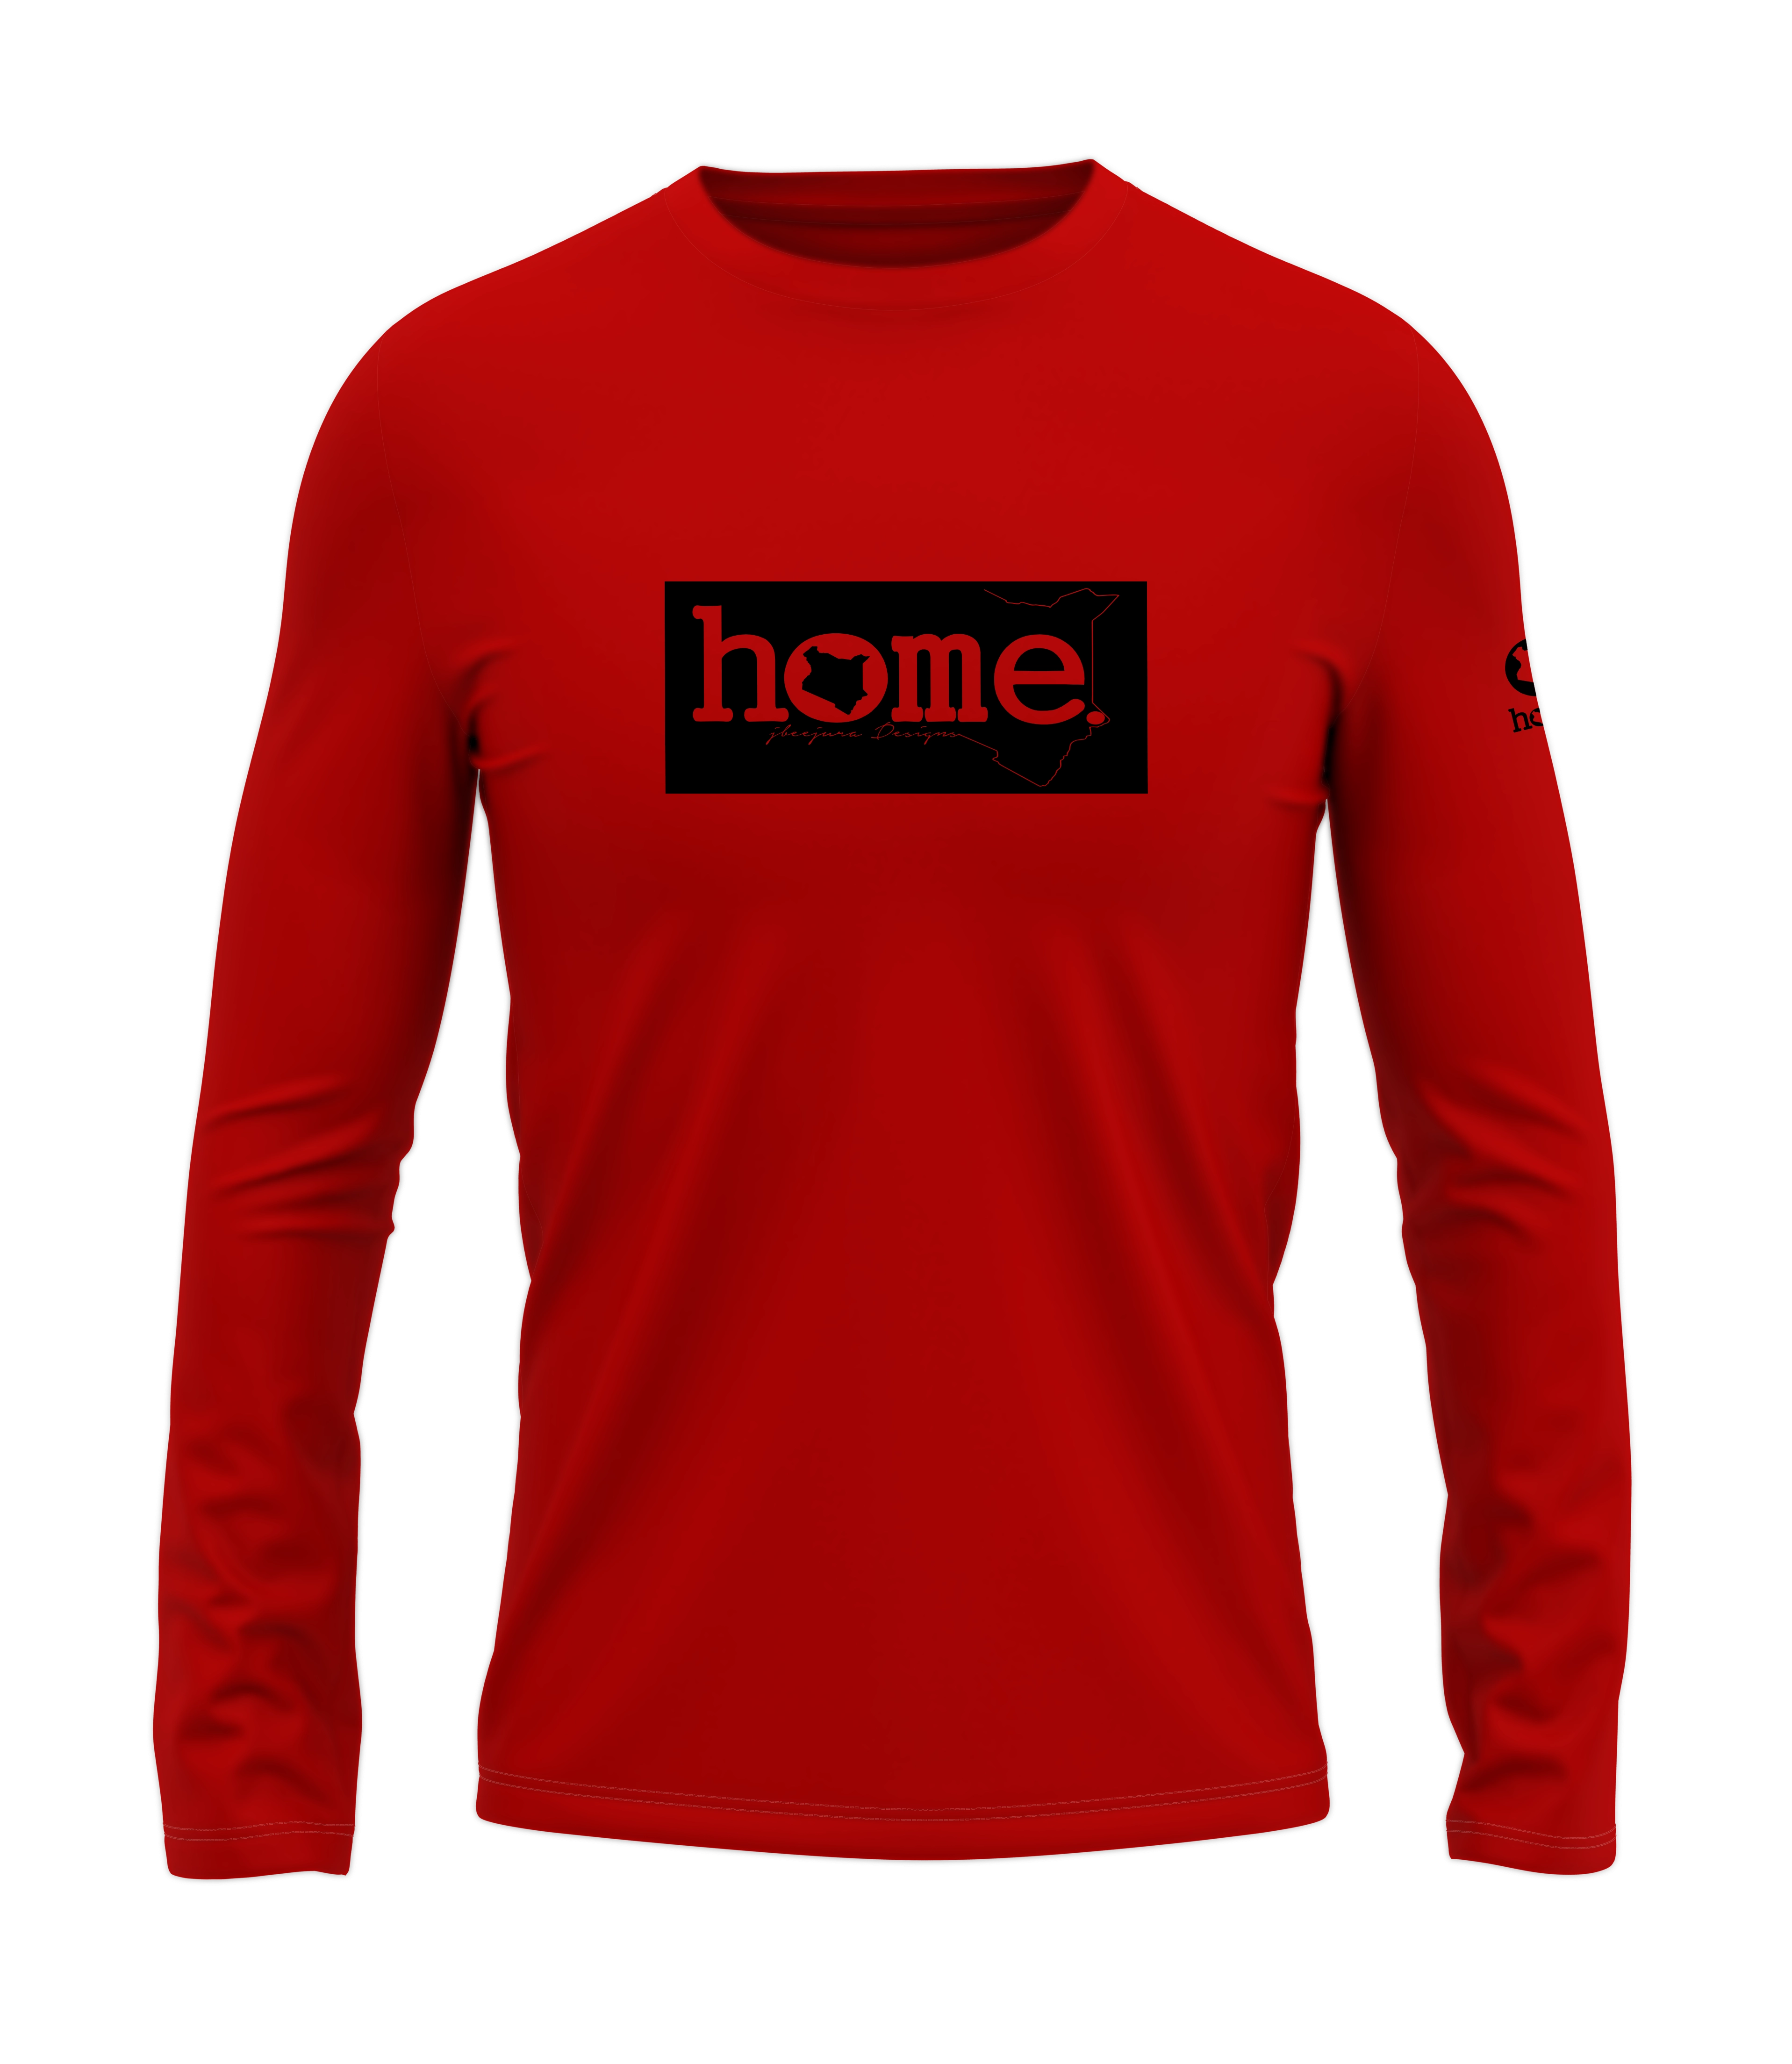 home_254 LONG-SLEEVED RED T-SHIRT WITH A BLACK CLASSIC PRINT – COTTON PLUS FABRIC